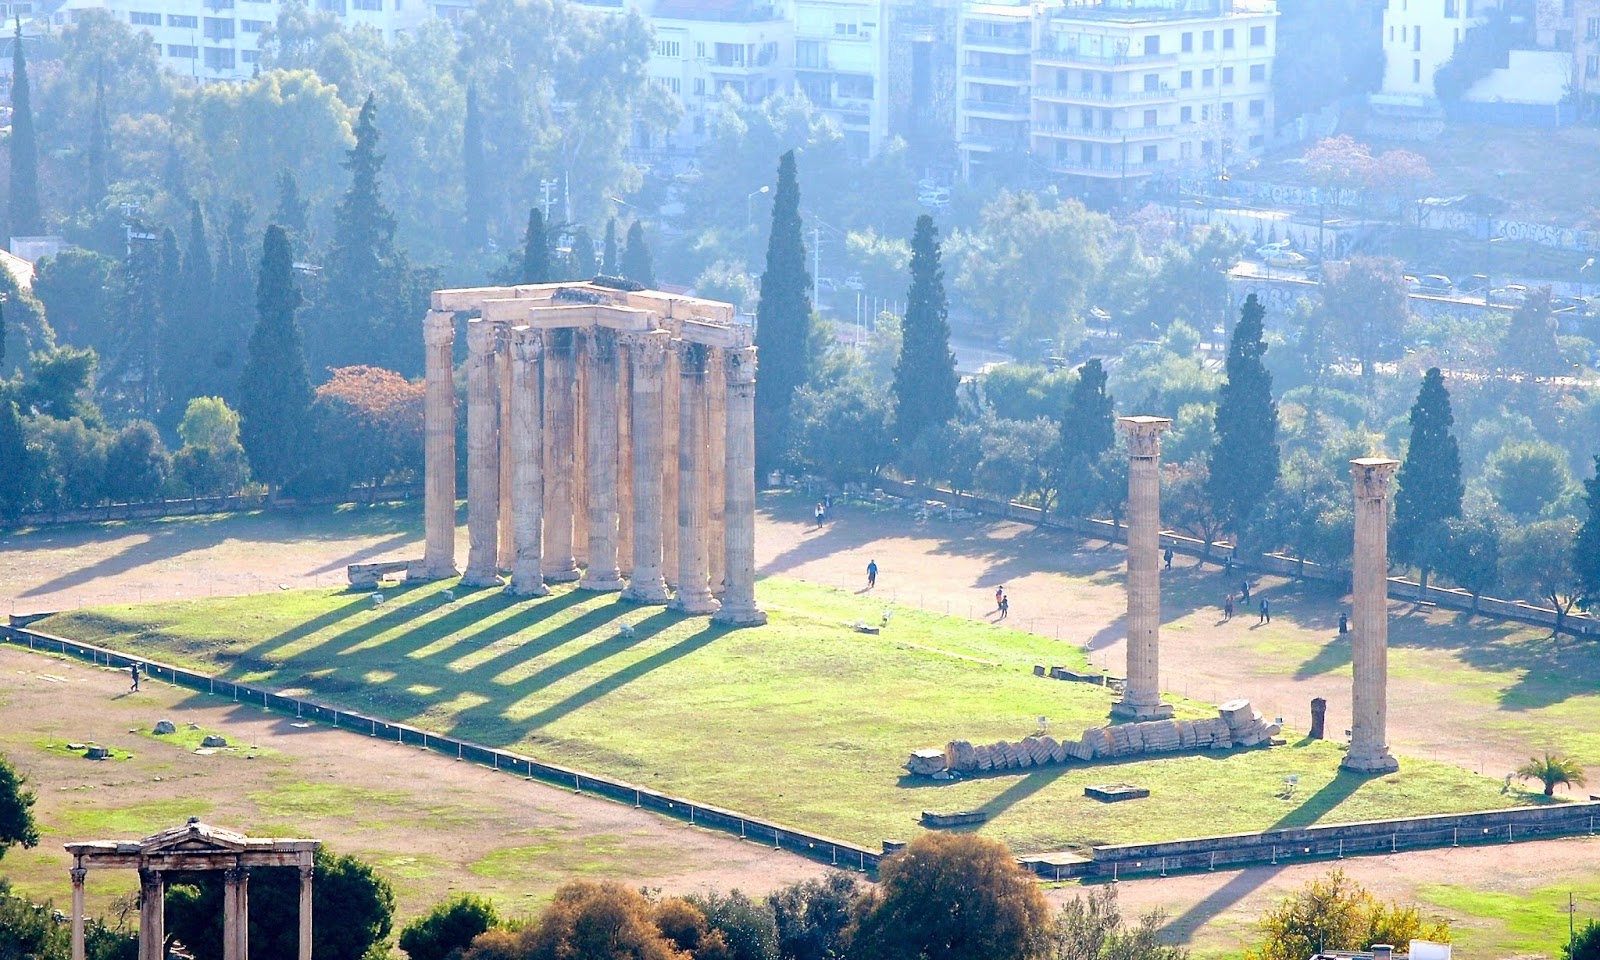 View of the Temple of Olympian Zeus from the Acropolis